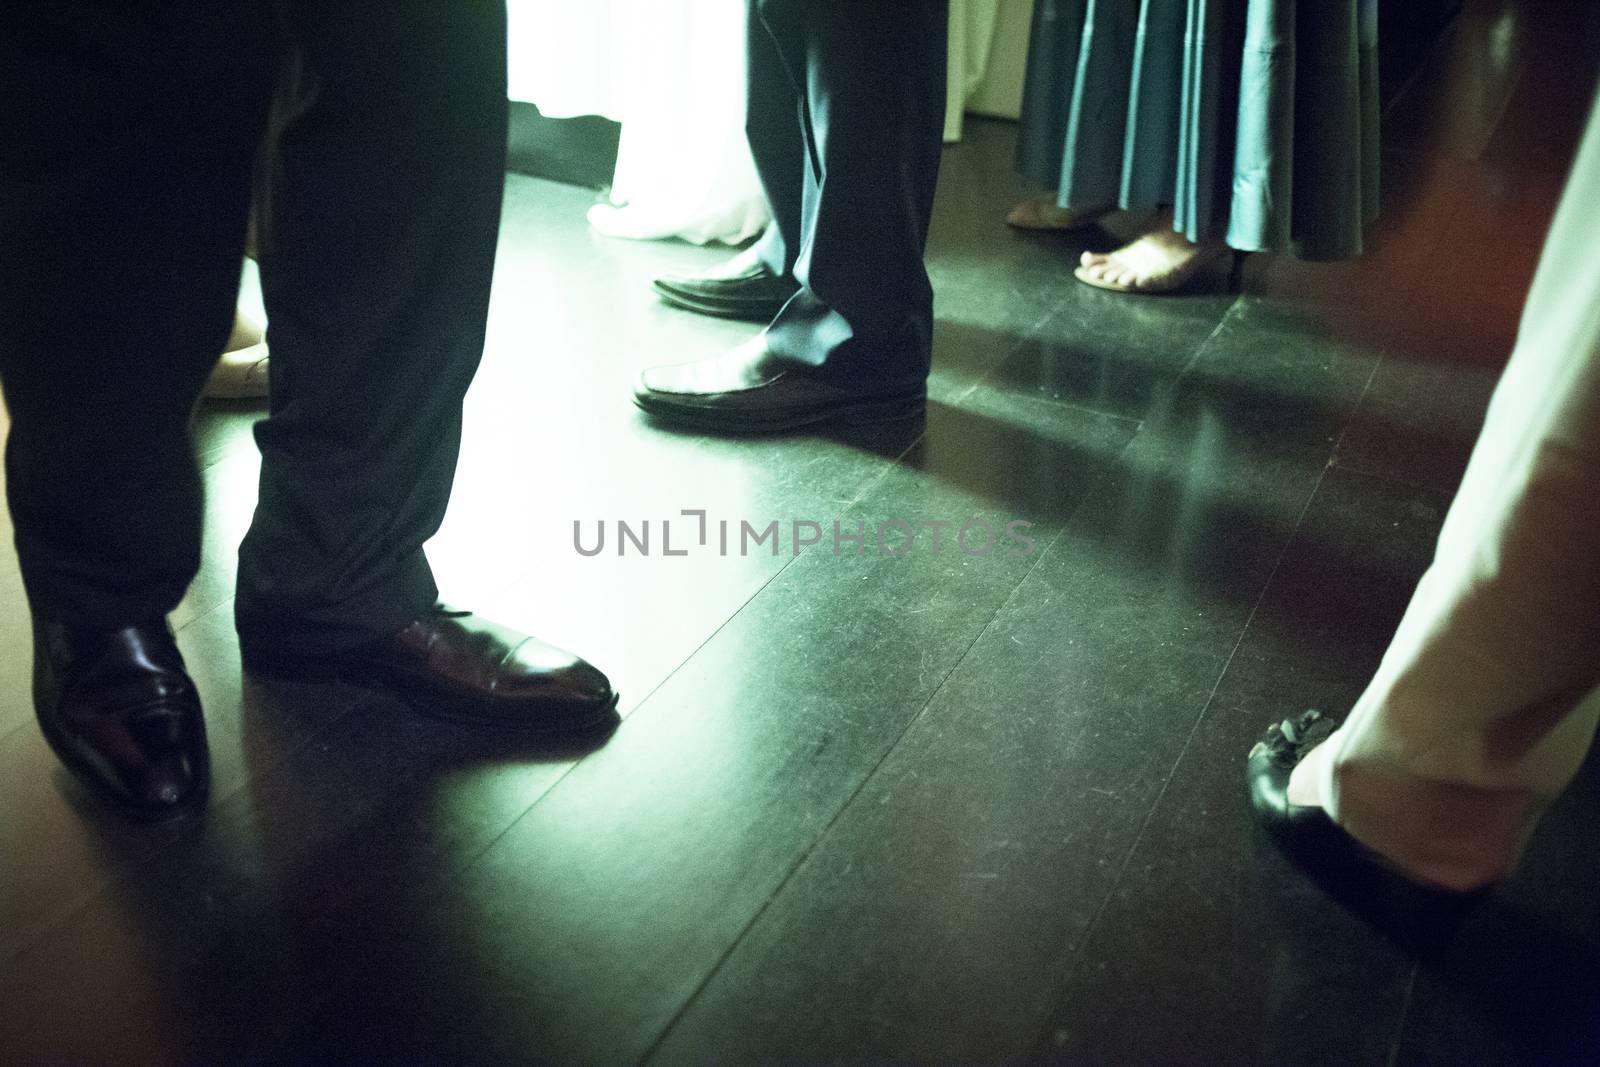 Legs of men and lady wearing standing on shiny tile floor in social event wedding marriage party in Madrid Spain. Green evening night tone color photograph. 